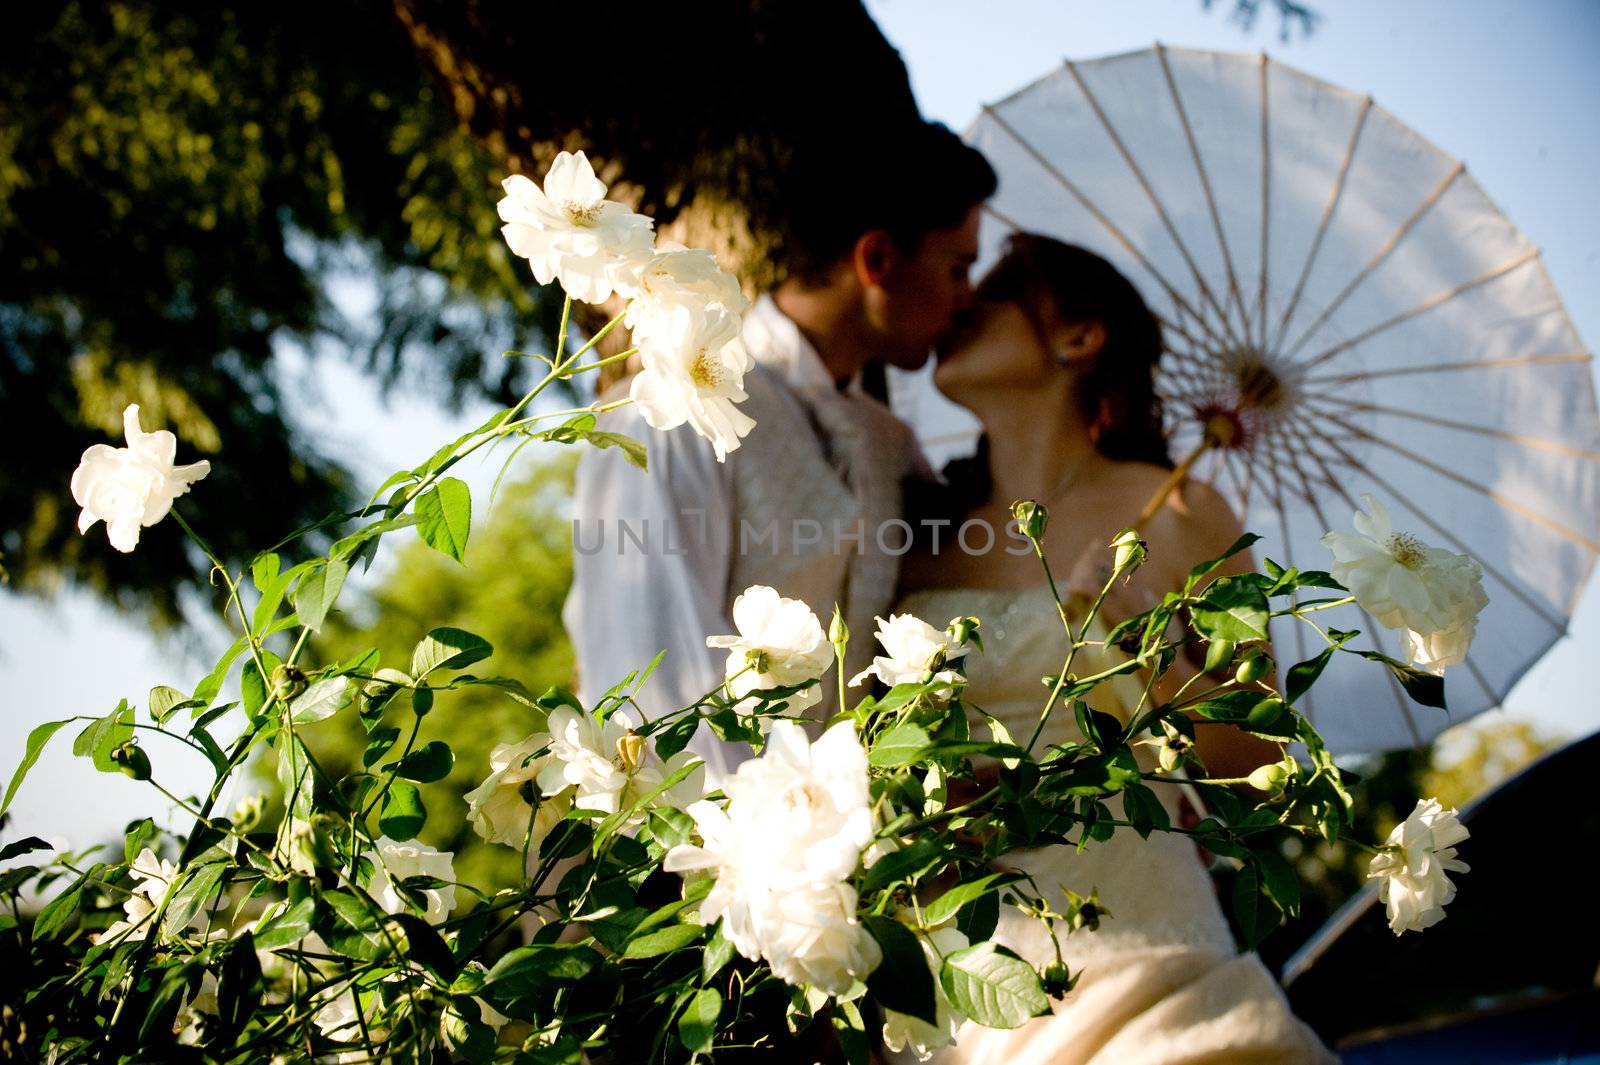 just married couple standing and kissing in white flower bed under a tree in nature on a sunny day